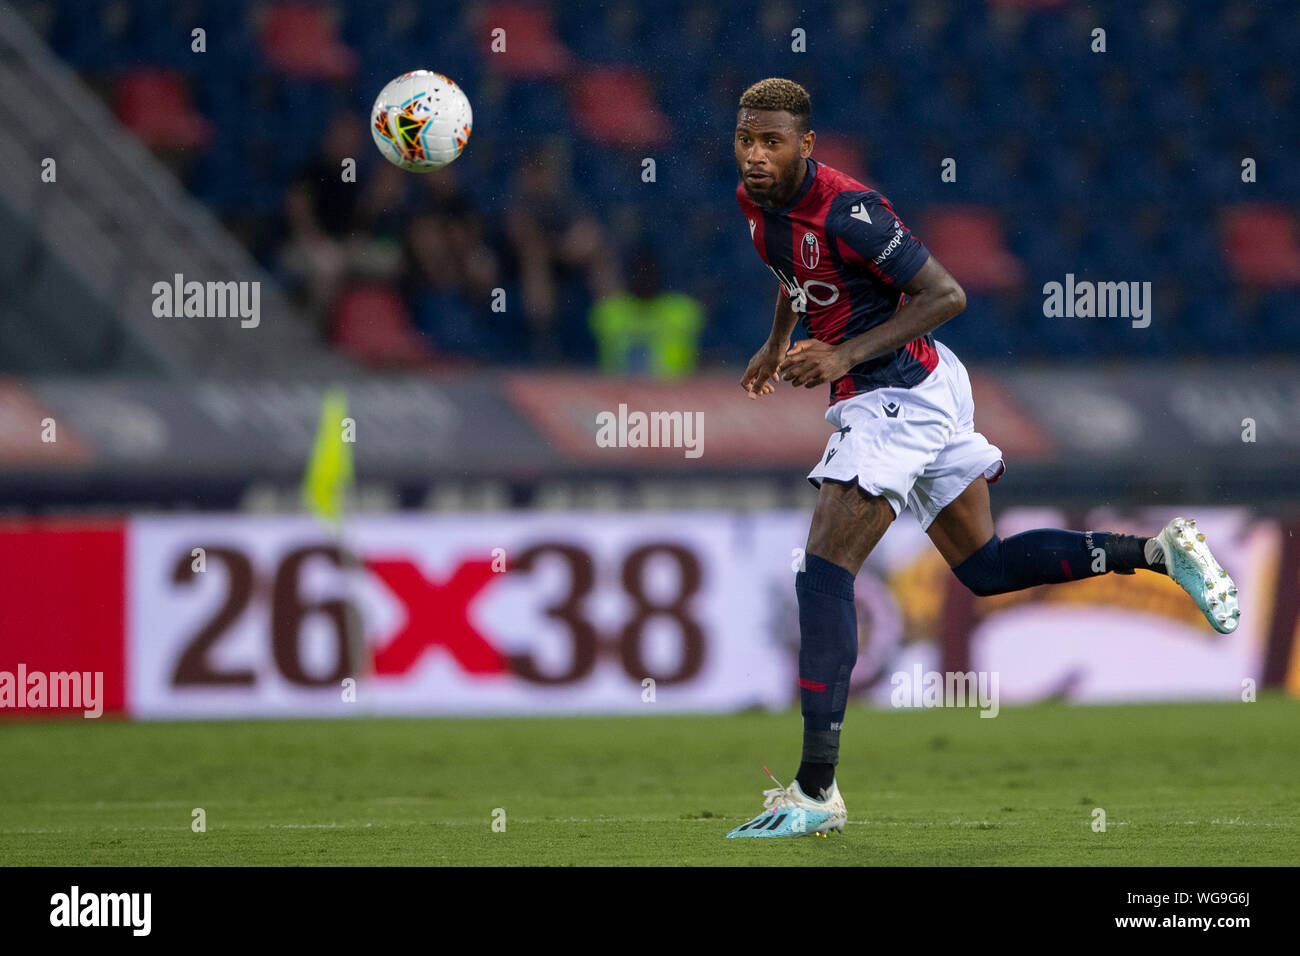 Stefano Denswil (Bologna)           during the Italian 'Serie A' match between Bologna 1-0 Spal at Renato Dall Ara Stadium on August 30 , 2019 in Bologna, Italy. (Photo by Maurizio Borsari/AFLO) Stock Photo